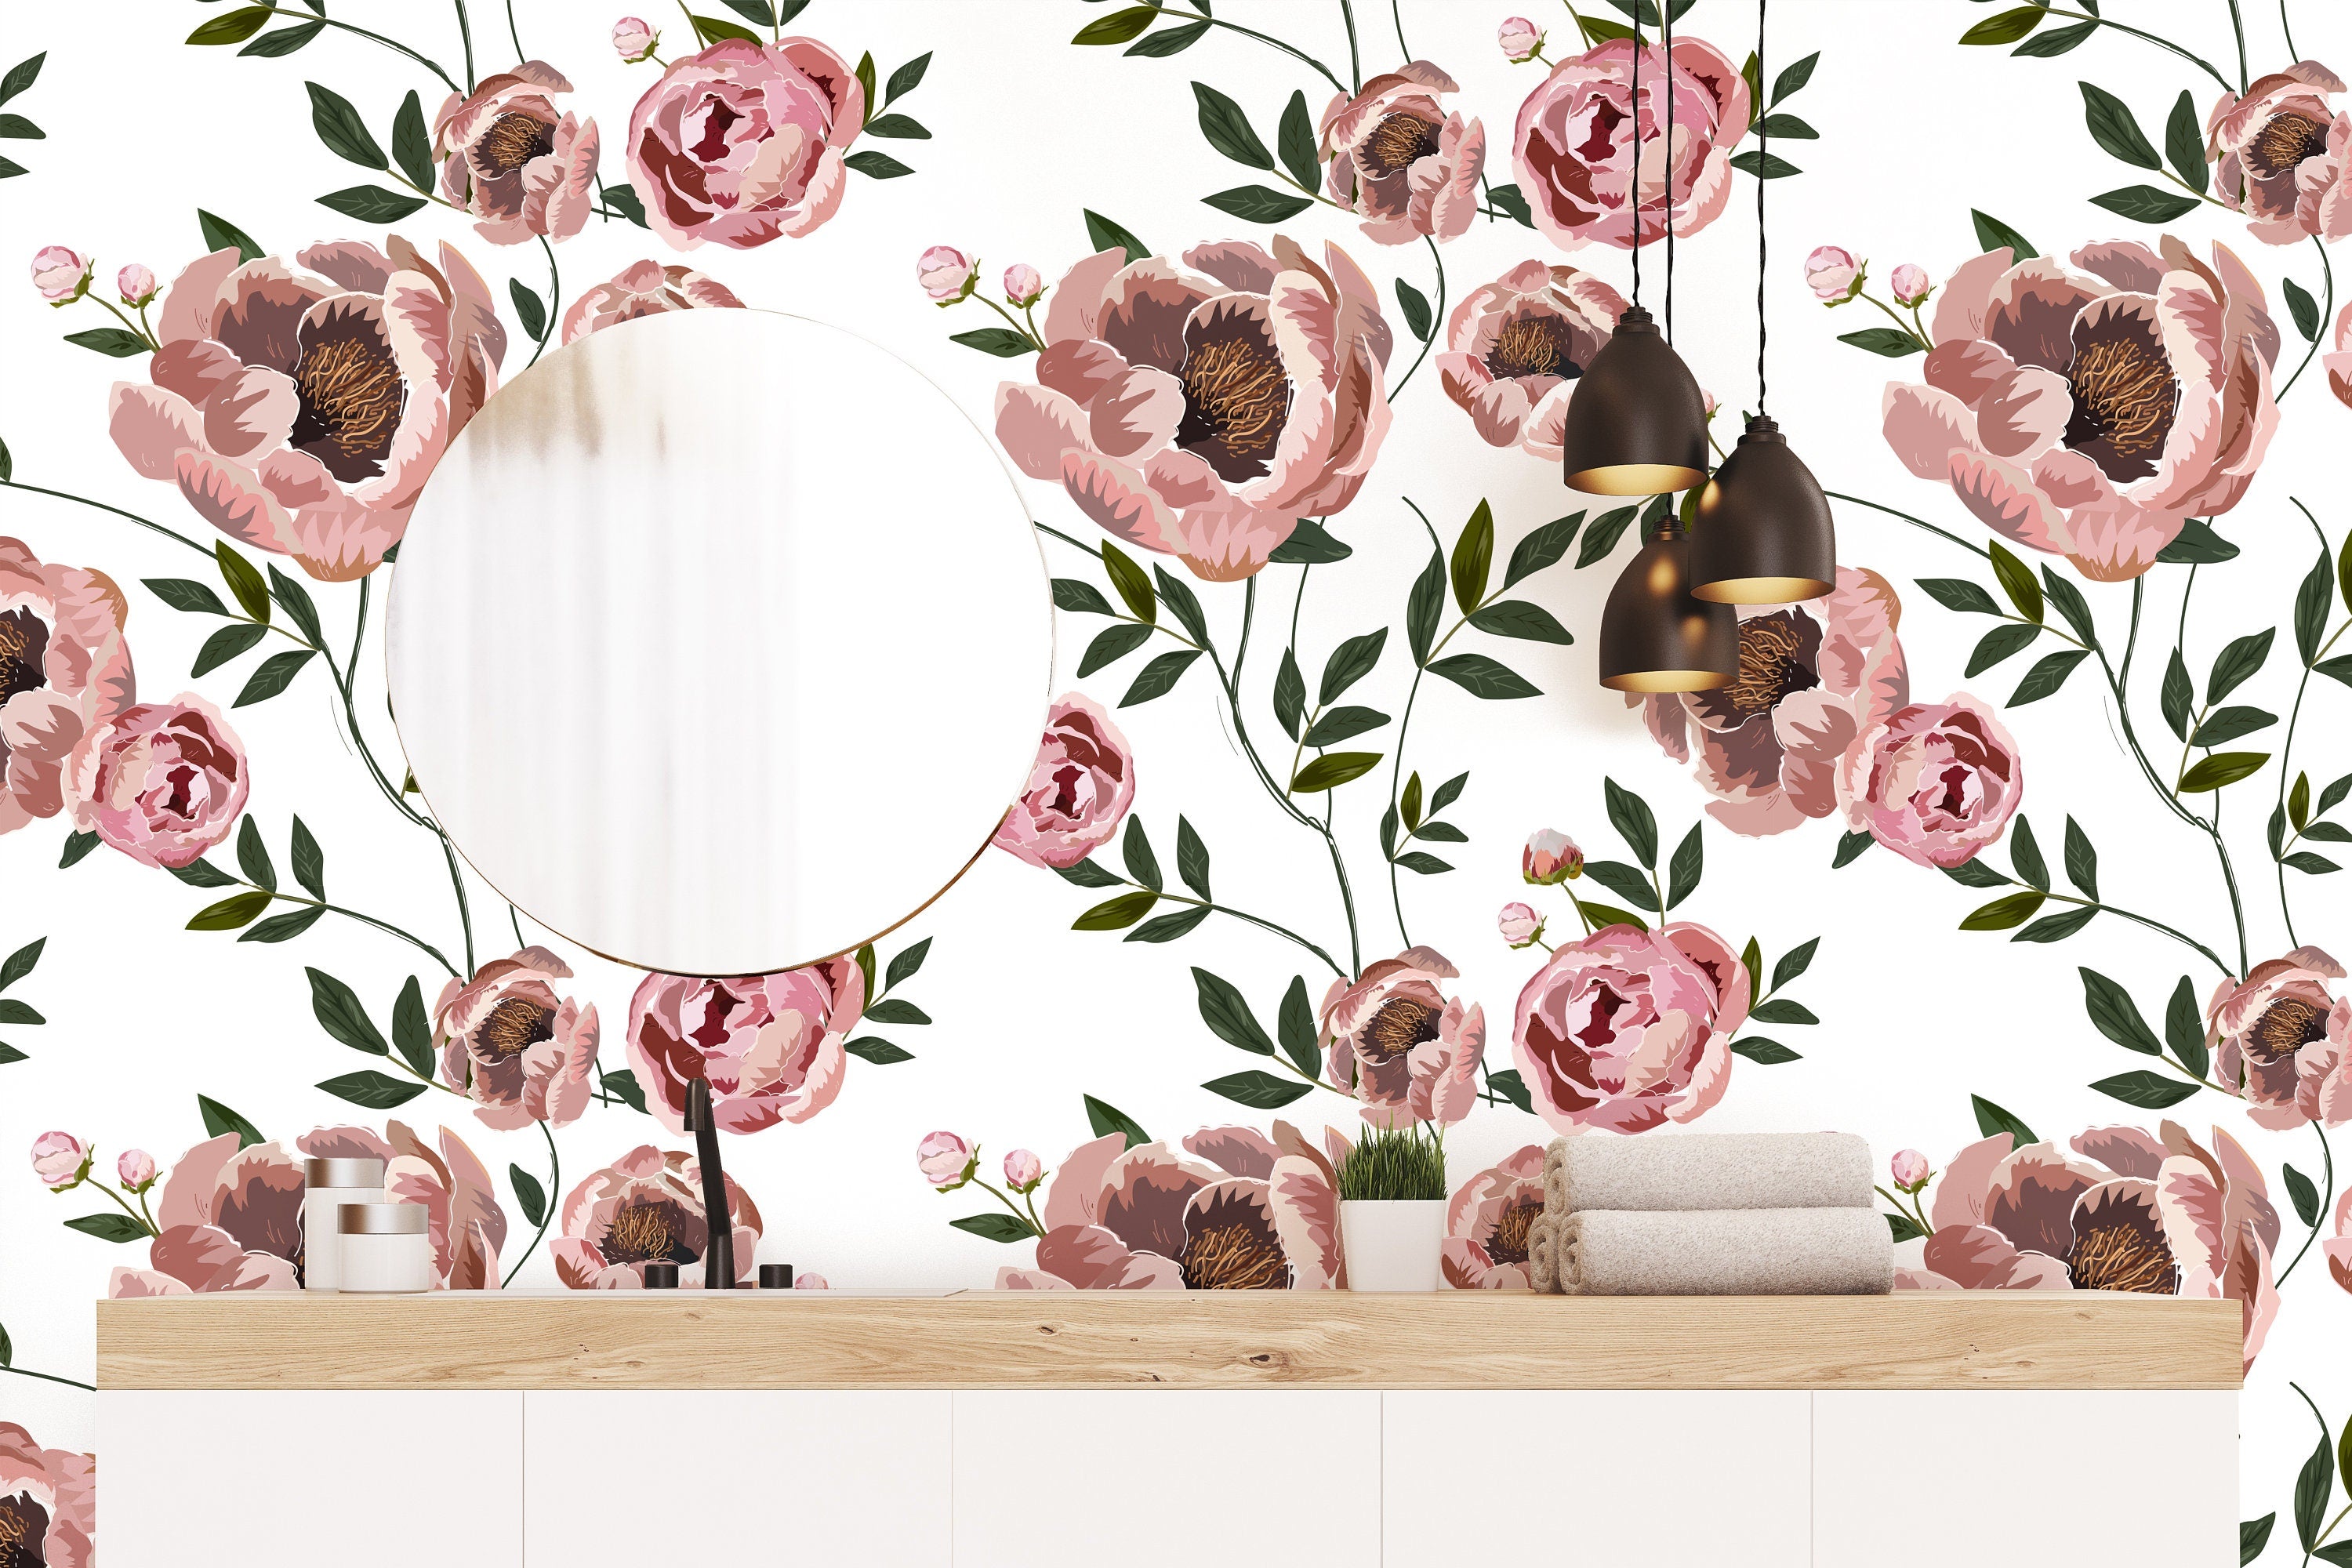 Soft Pink Garden Rose Flowers Floral Wallpaper | Wallpaper Peel and Stick | Removable Wallpaper | Wall Paper Peel And Stick 3451 - JamesAndColors